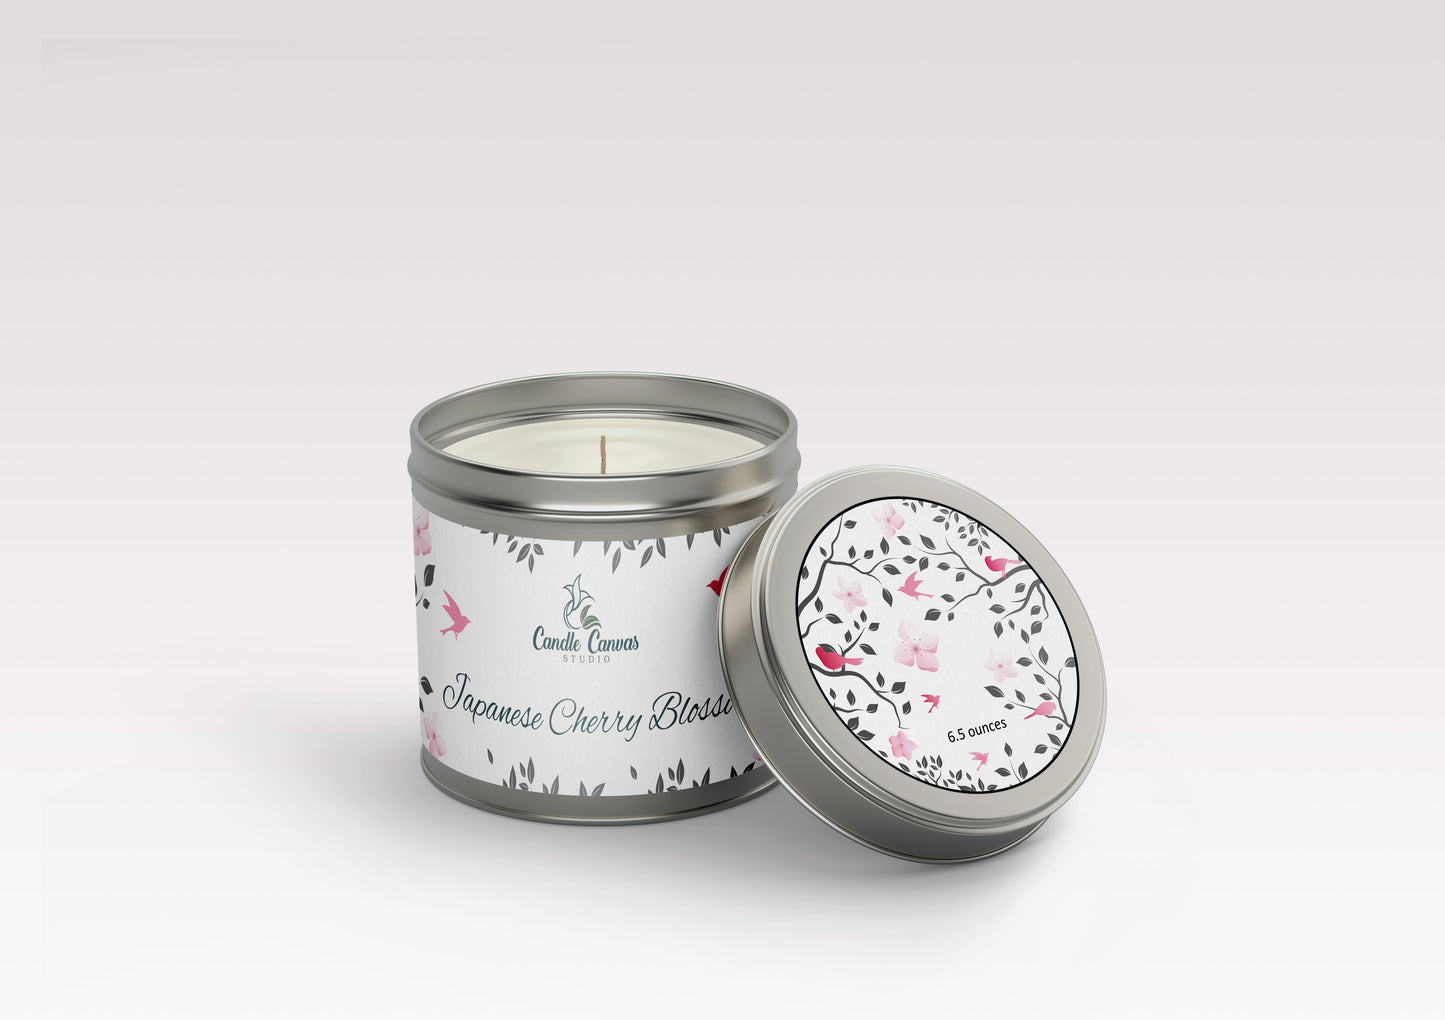 Japanese Cherry Blossom Candle Tin